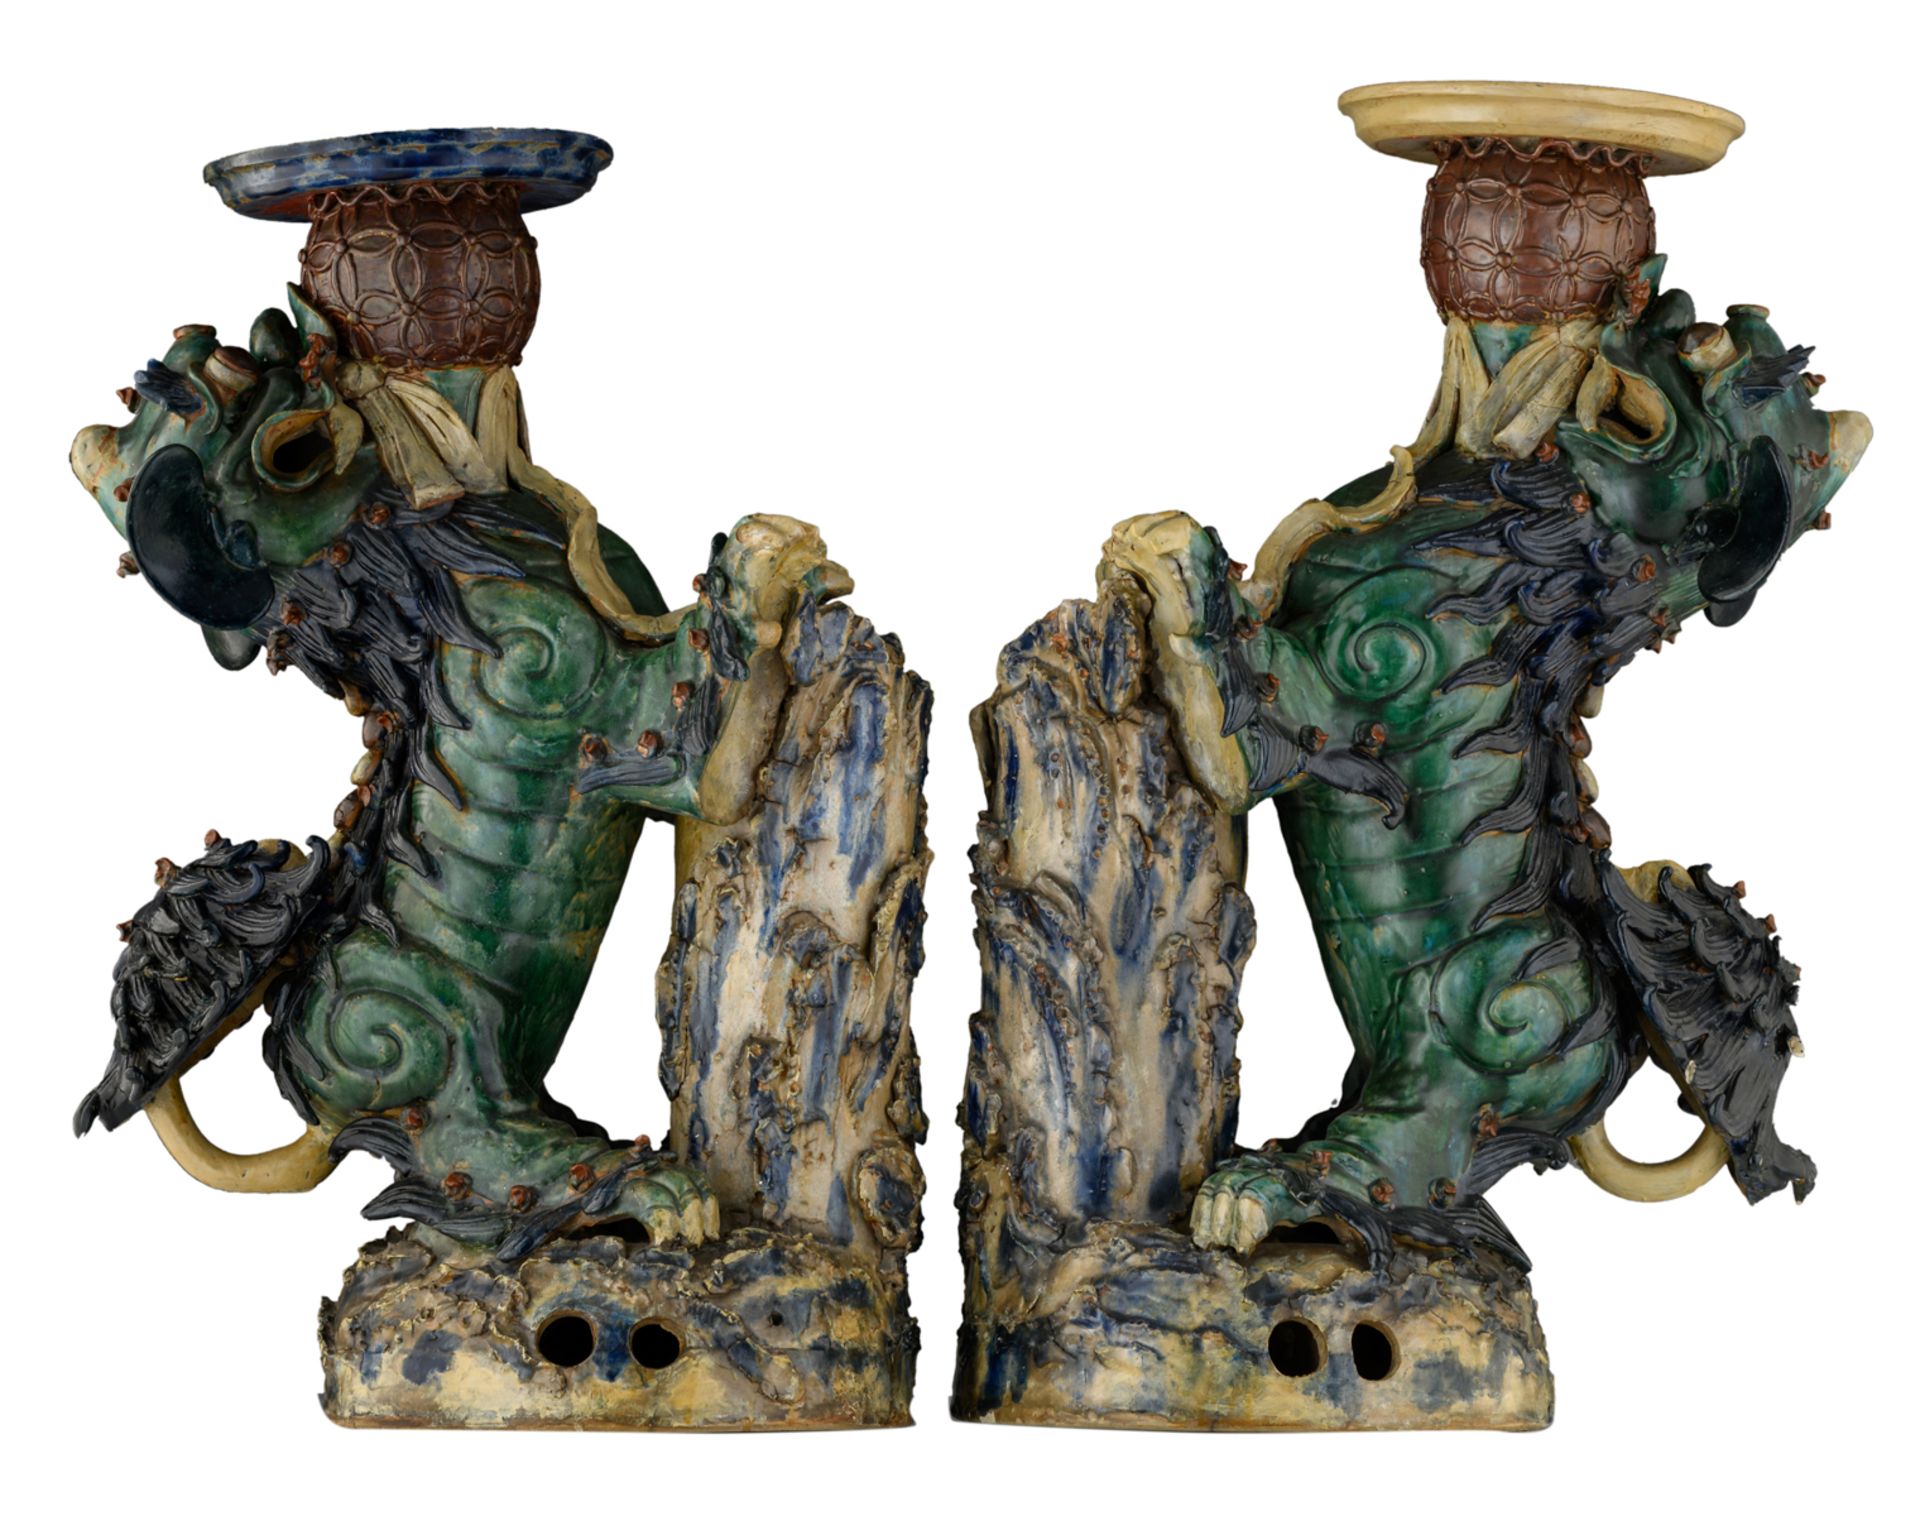 A pair of large polychrome decorated earthenware Fu lions, playing with a ball, H 76,5 - 80 - W 34,5